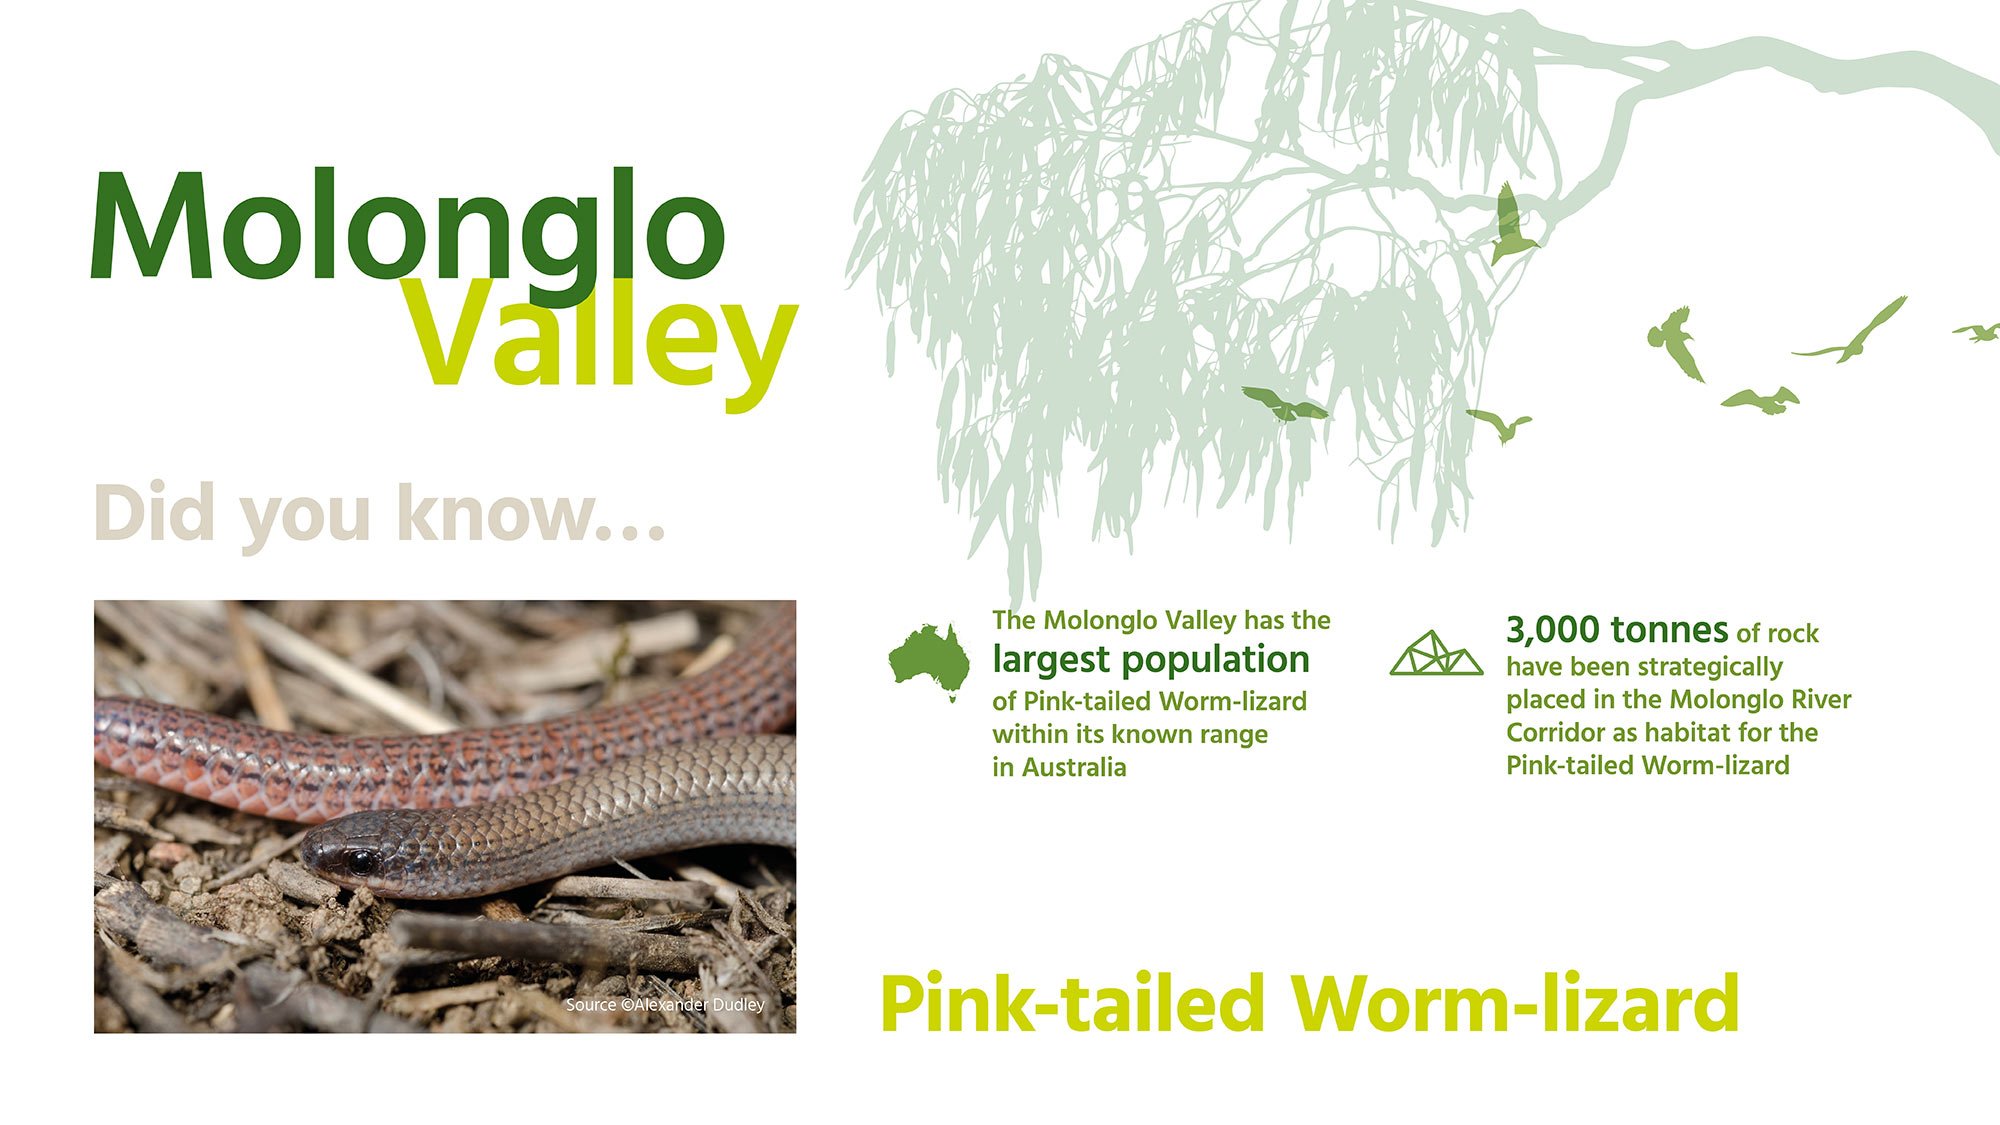 Did you know? Molonglo Valley